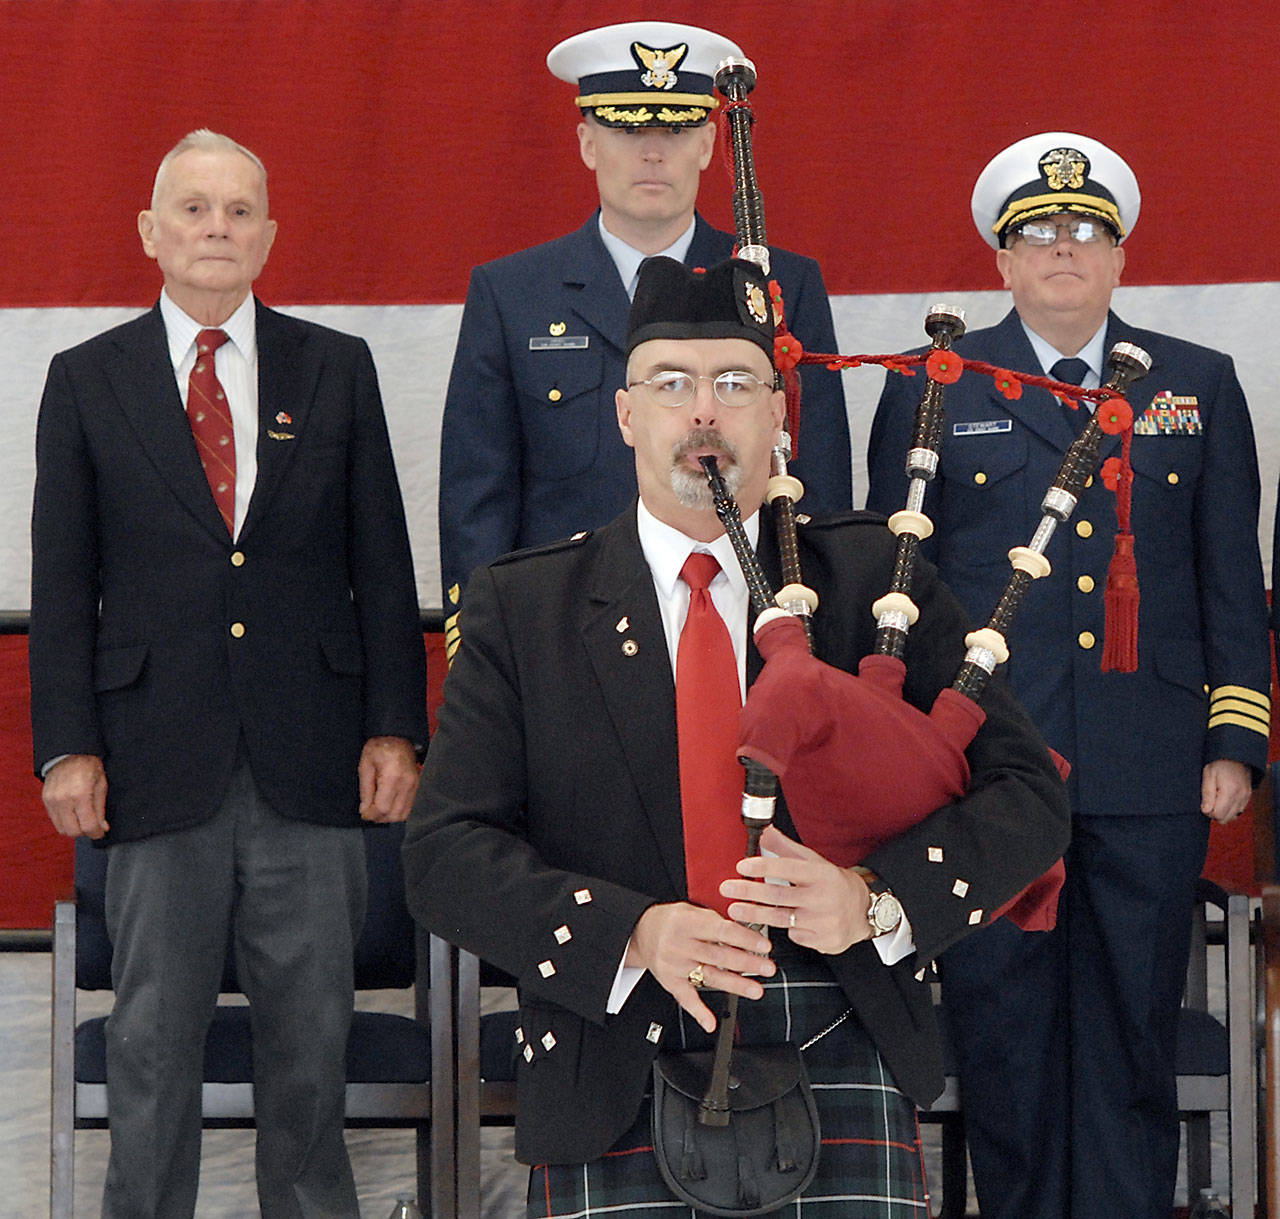 Bagpiper Rick McKenzie, a retiree from the U.S. Coast Guard, plays “Amazing Grace” to help close out Saturday’s Veterans Day ceremony. On the podium behind were, from left, retired U.S. Marine Corp Col. Thomas Johnson, Capt. Mark Hiigel, commanding officer of U.S. Coast Guard Air Station/Sector Field Office Port Angeles, and Coast Guard District 13 Chaplain Cmdr. William Stuart. (Keith Thorpe/Peninsula Daily News)